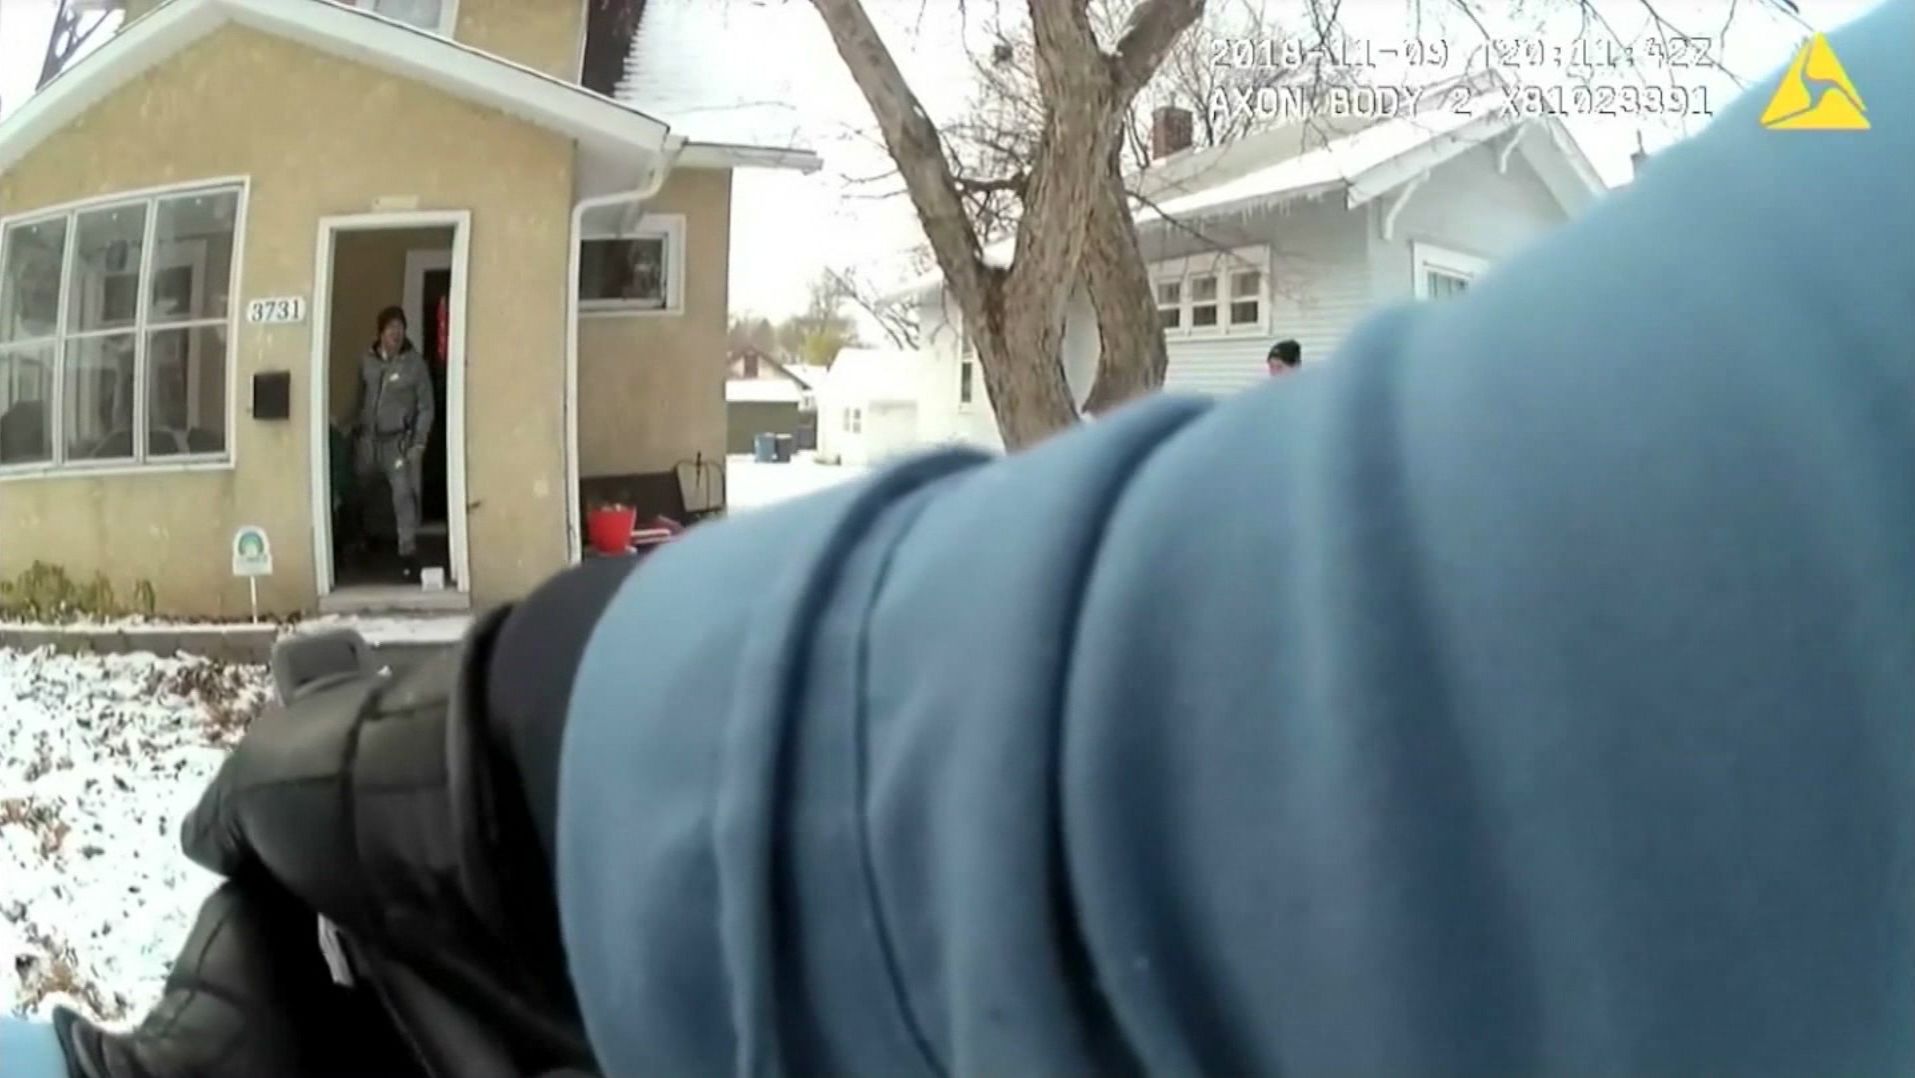 In bodycam footage released by the Minneapolis Police Department, Travis Jordan can be seen exiting a house.